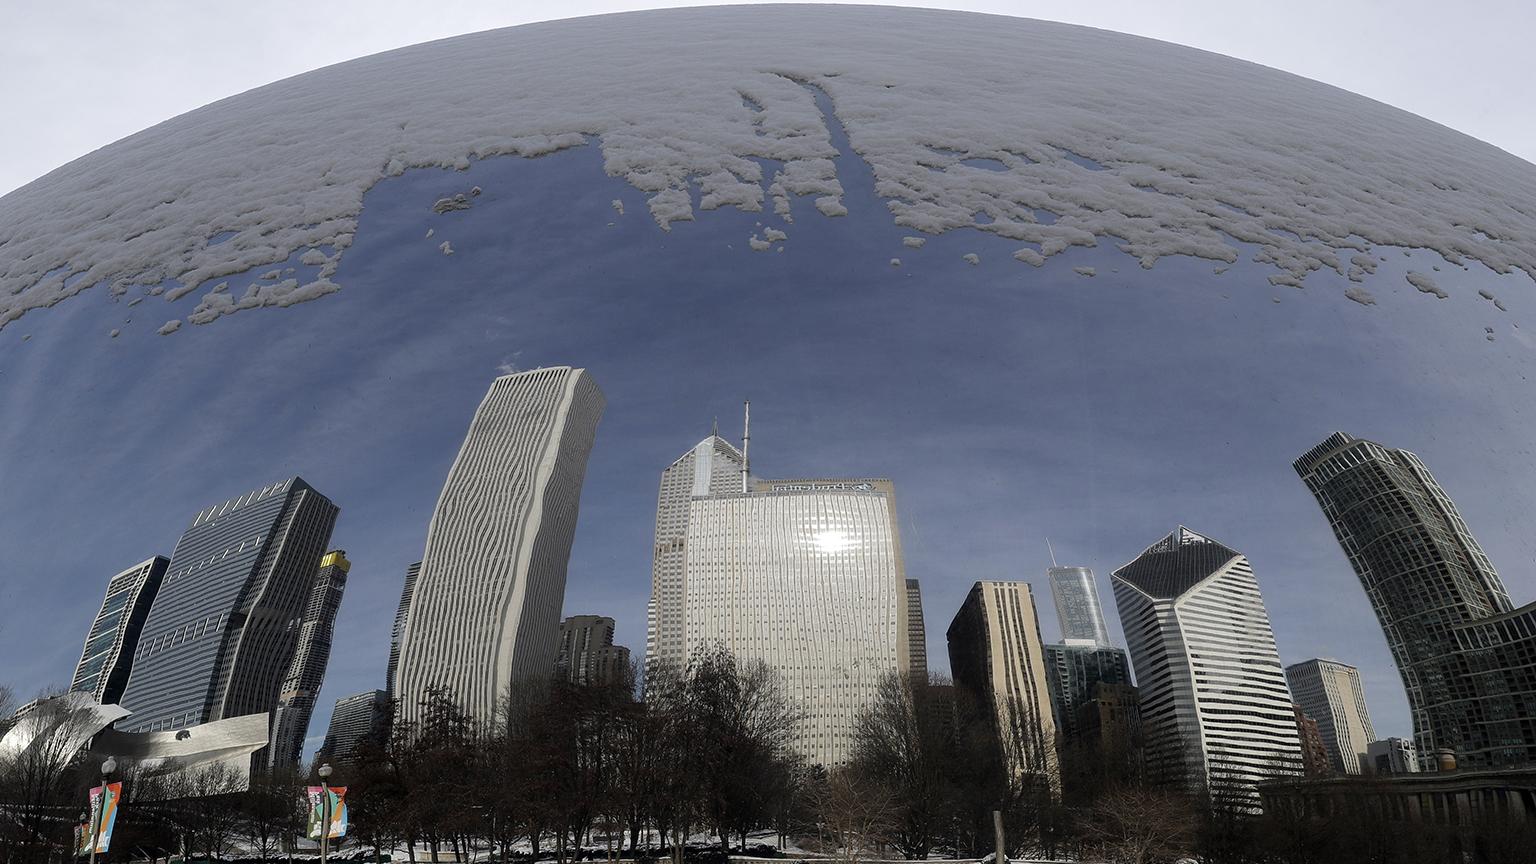 Reflections of a snowy city are seen in the 110-ton stainless steel Anish Kapoor sculpture called “Cloud Gate” at Millennium Park in Chicago, Sunday, Jan. 27, 2019. (AP Photo / Nam Y. Huh)